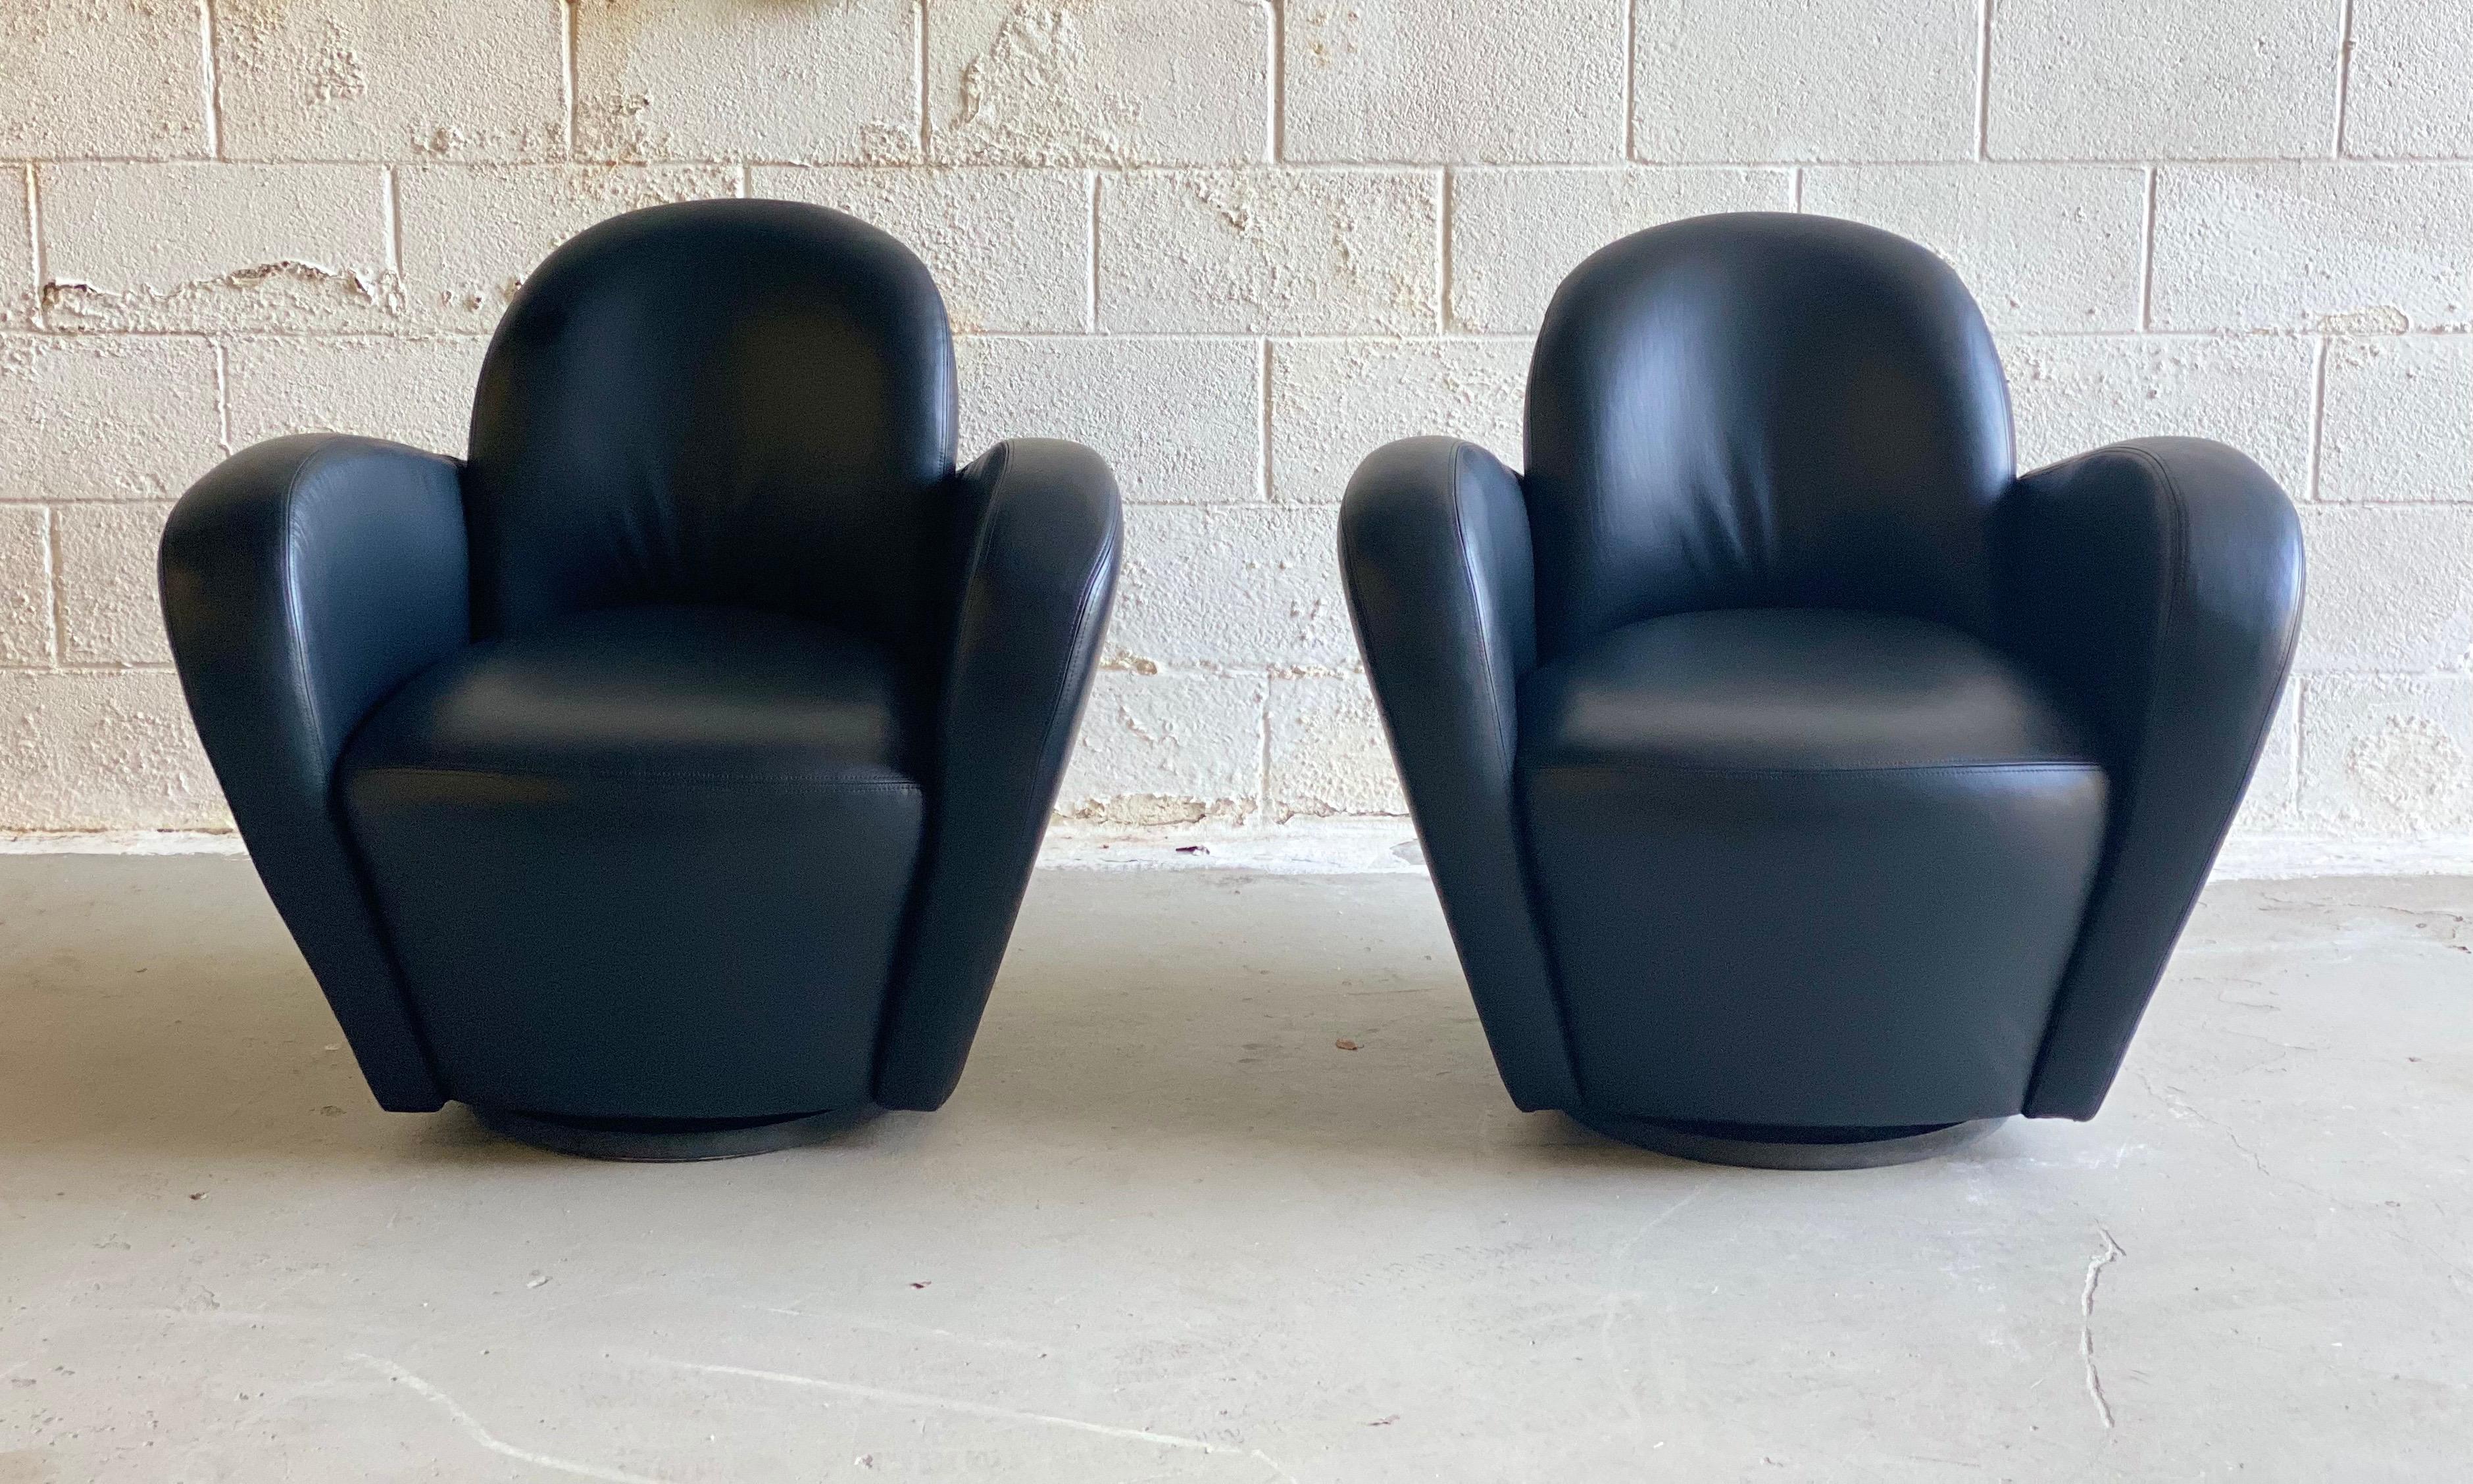 We are very pleased to offer a sculptural, incredible pair of wrap-around barrel swivel chairs by Michael Wolk for Preview, circa the 1990s. These beautiful swivel ergonomic tulip shaped chairs showcase a black leather. In great condition with